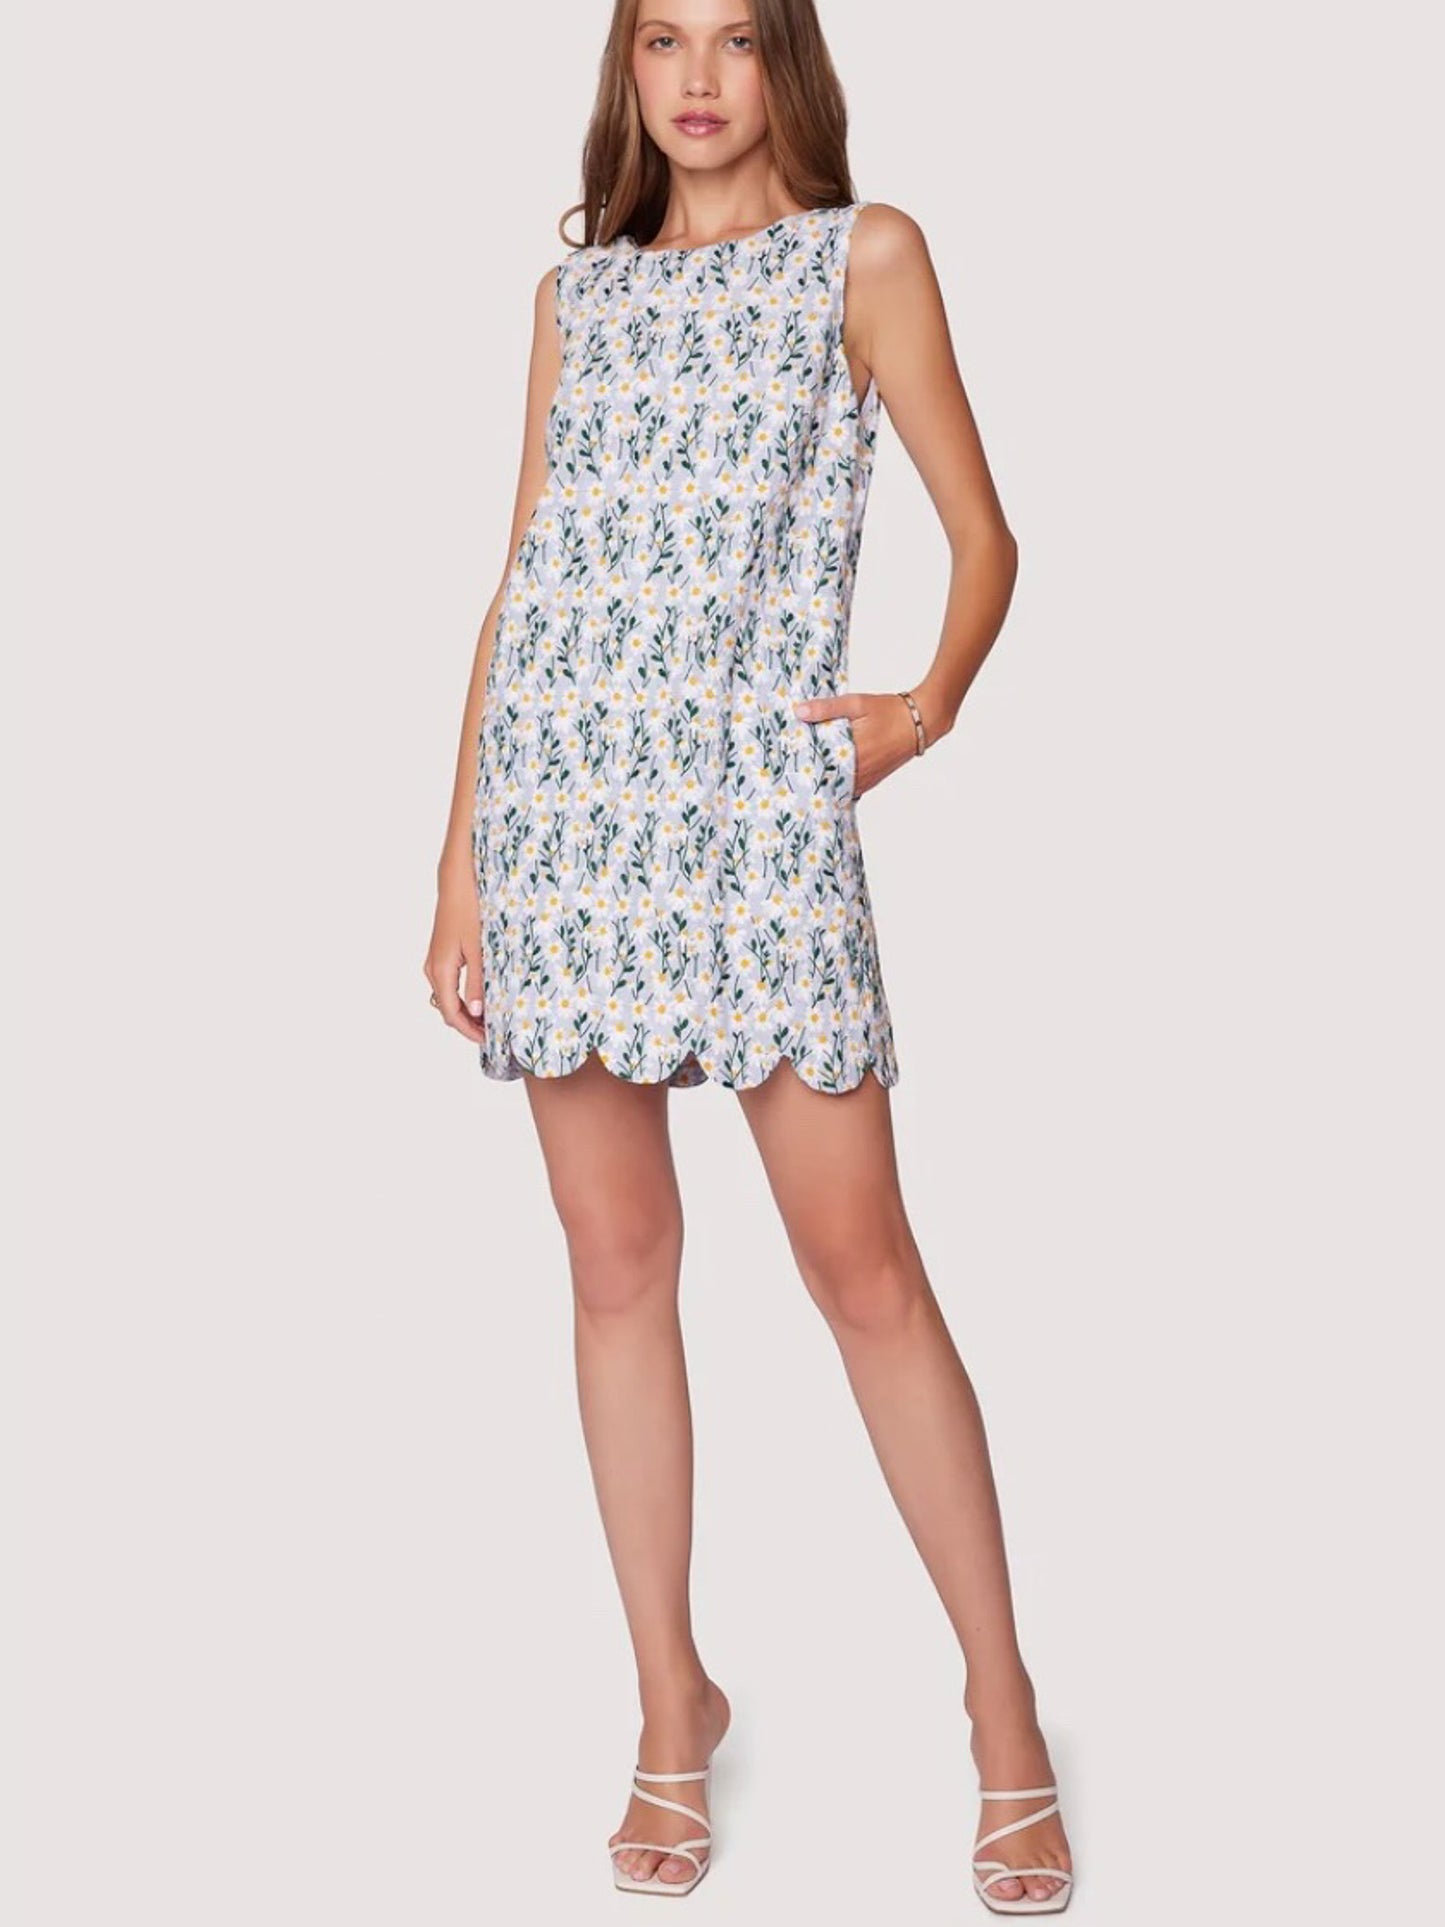 Breath of Youth Scallop Shift Dress